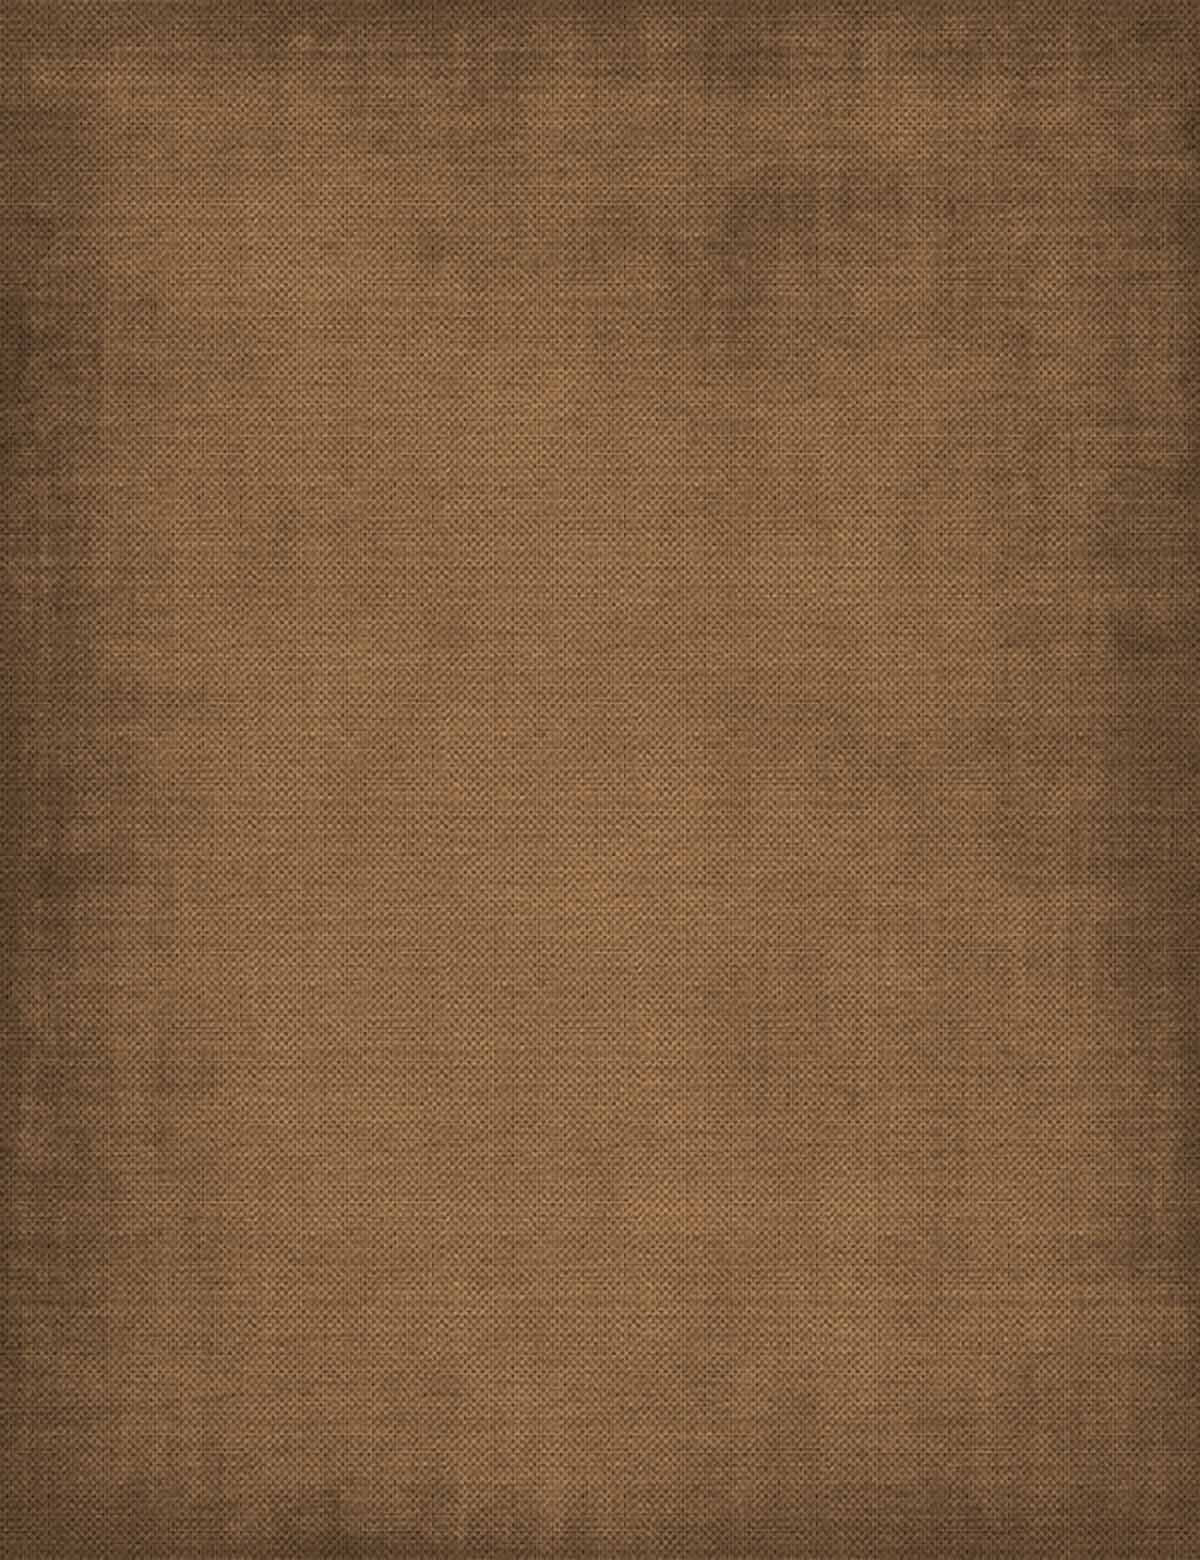 Old Master Bronze Color Fabric Texture Photography